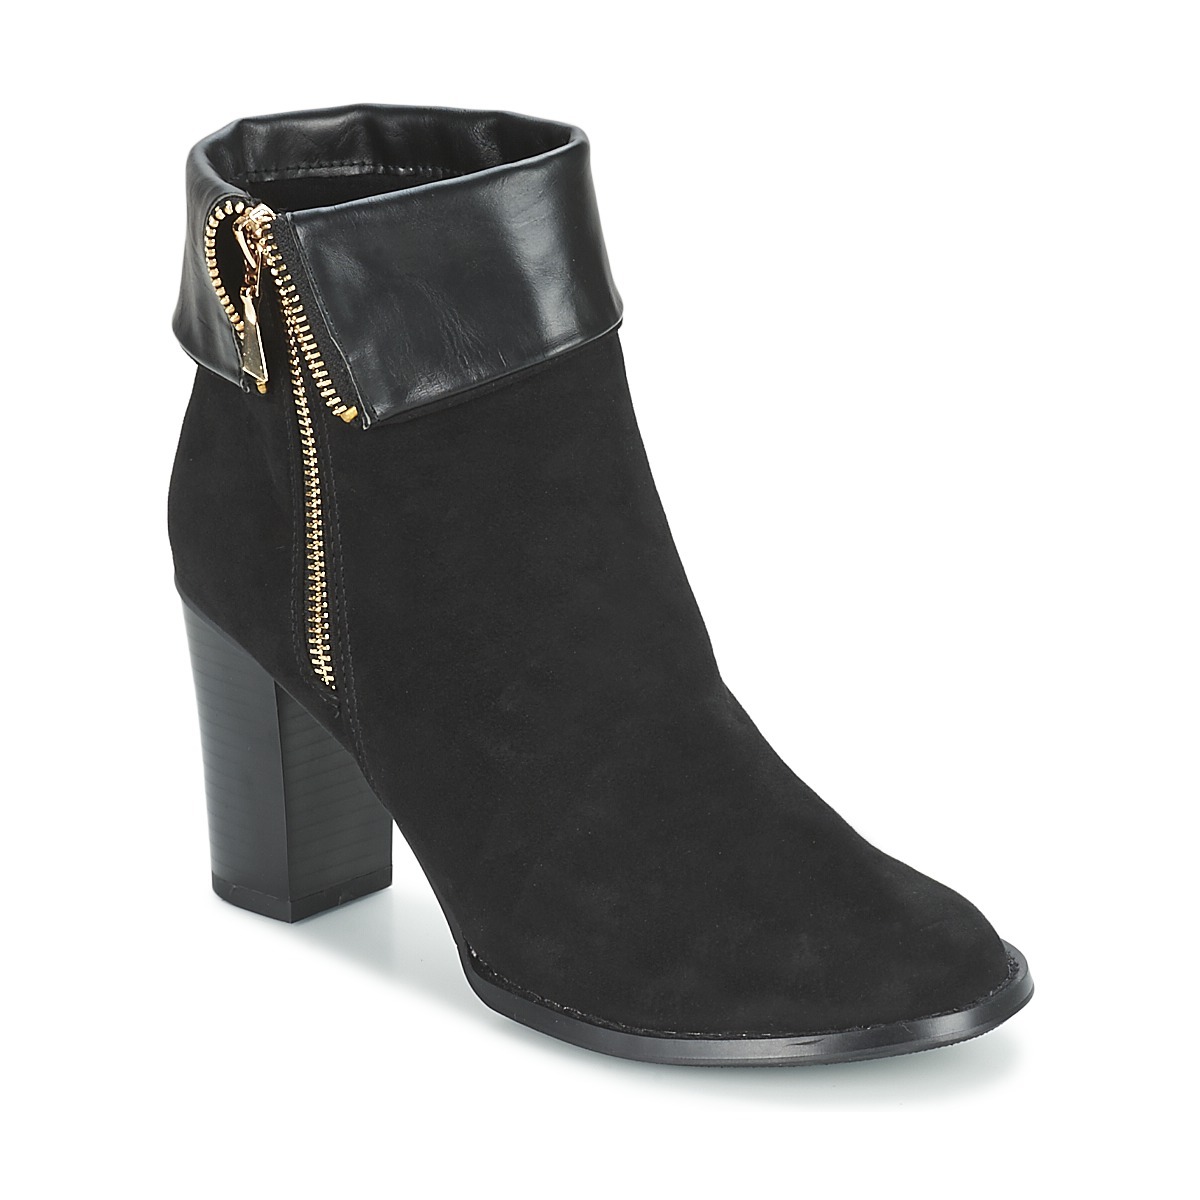 Spartoo Ankle Boots in Black by Moony Mood GOOFASH